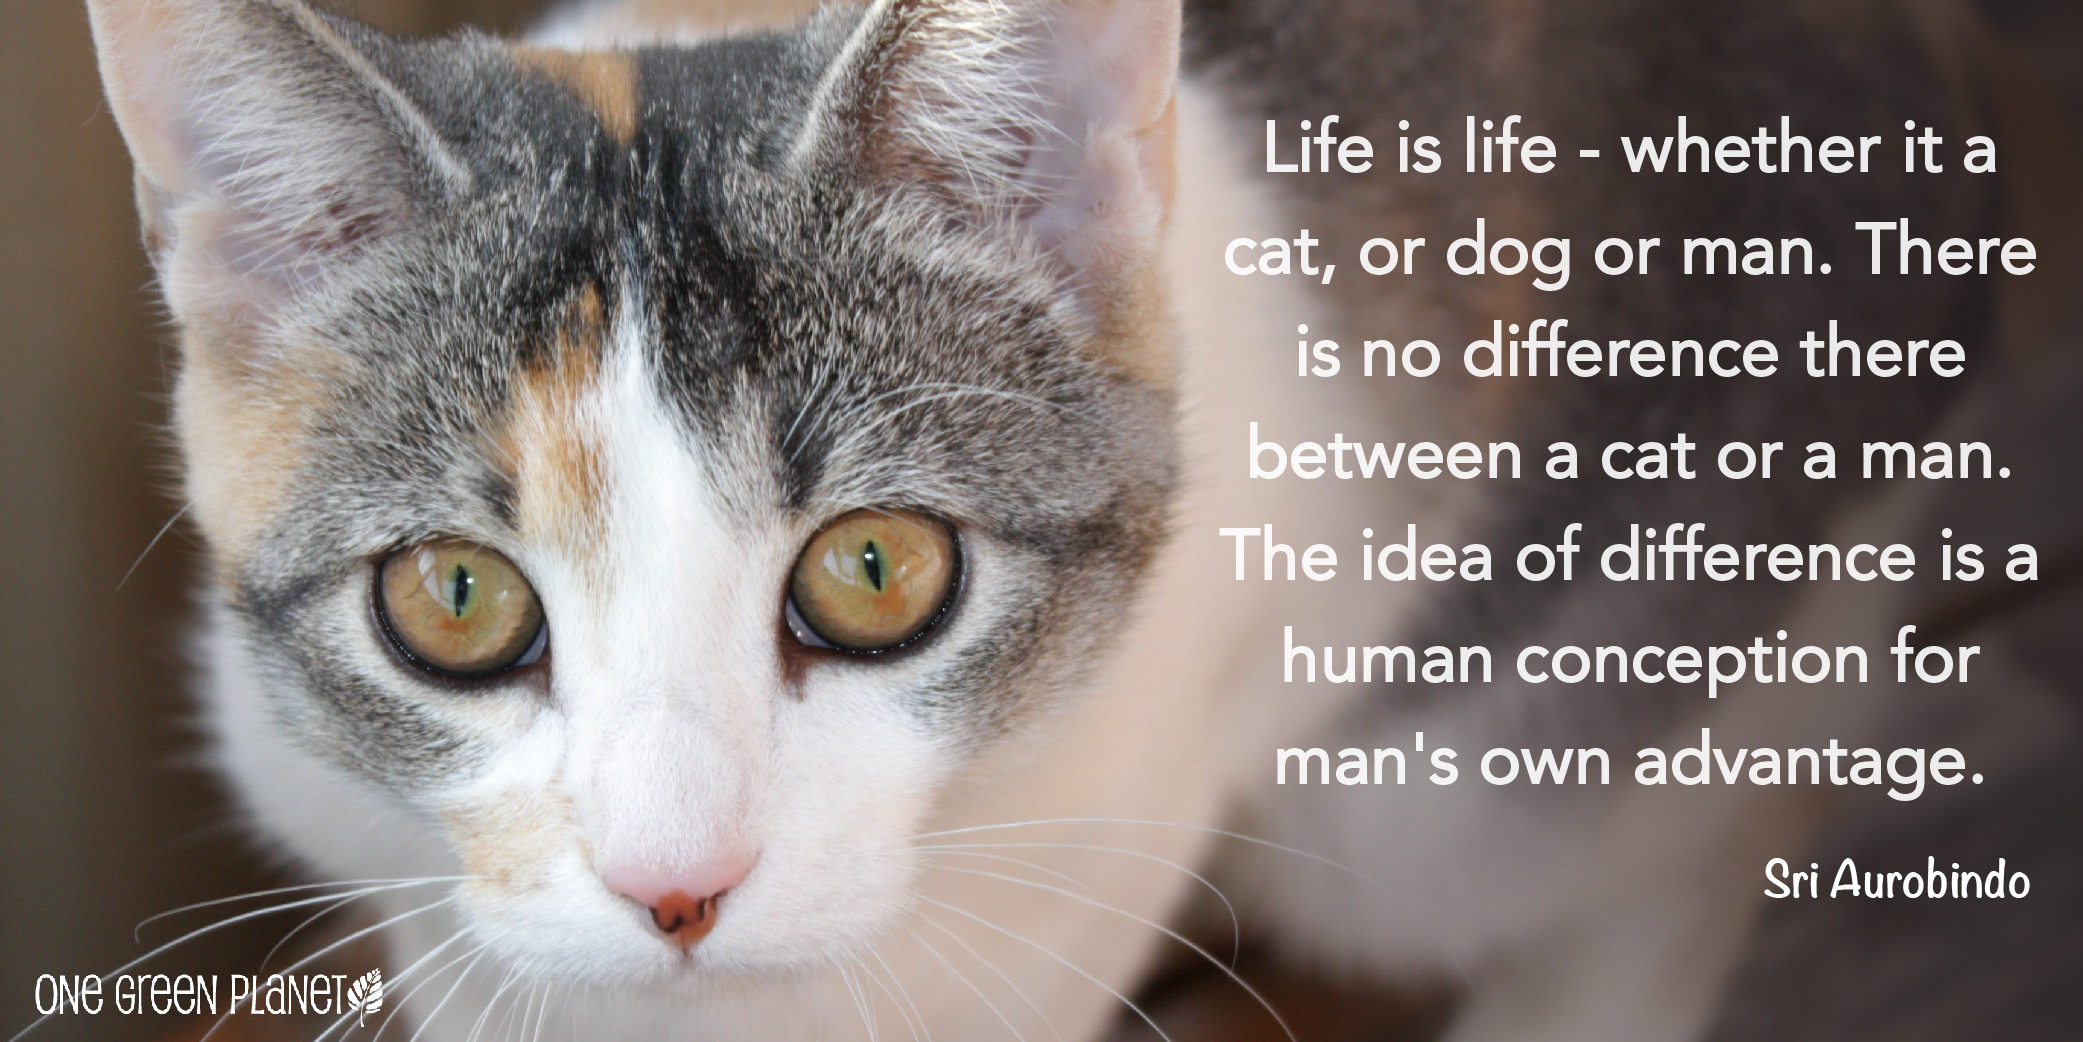 Quotes About Helping Animals. QuotesGram